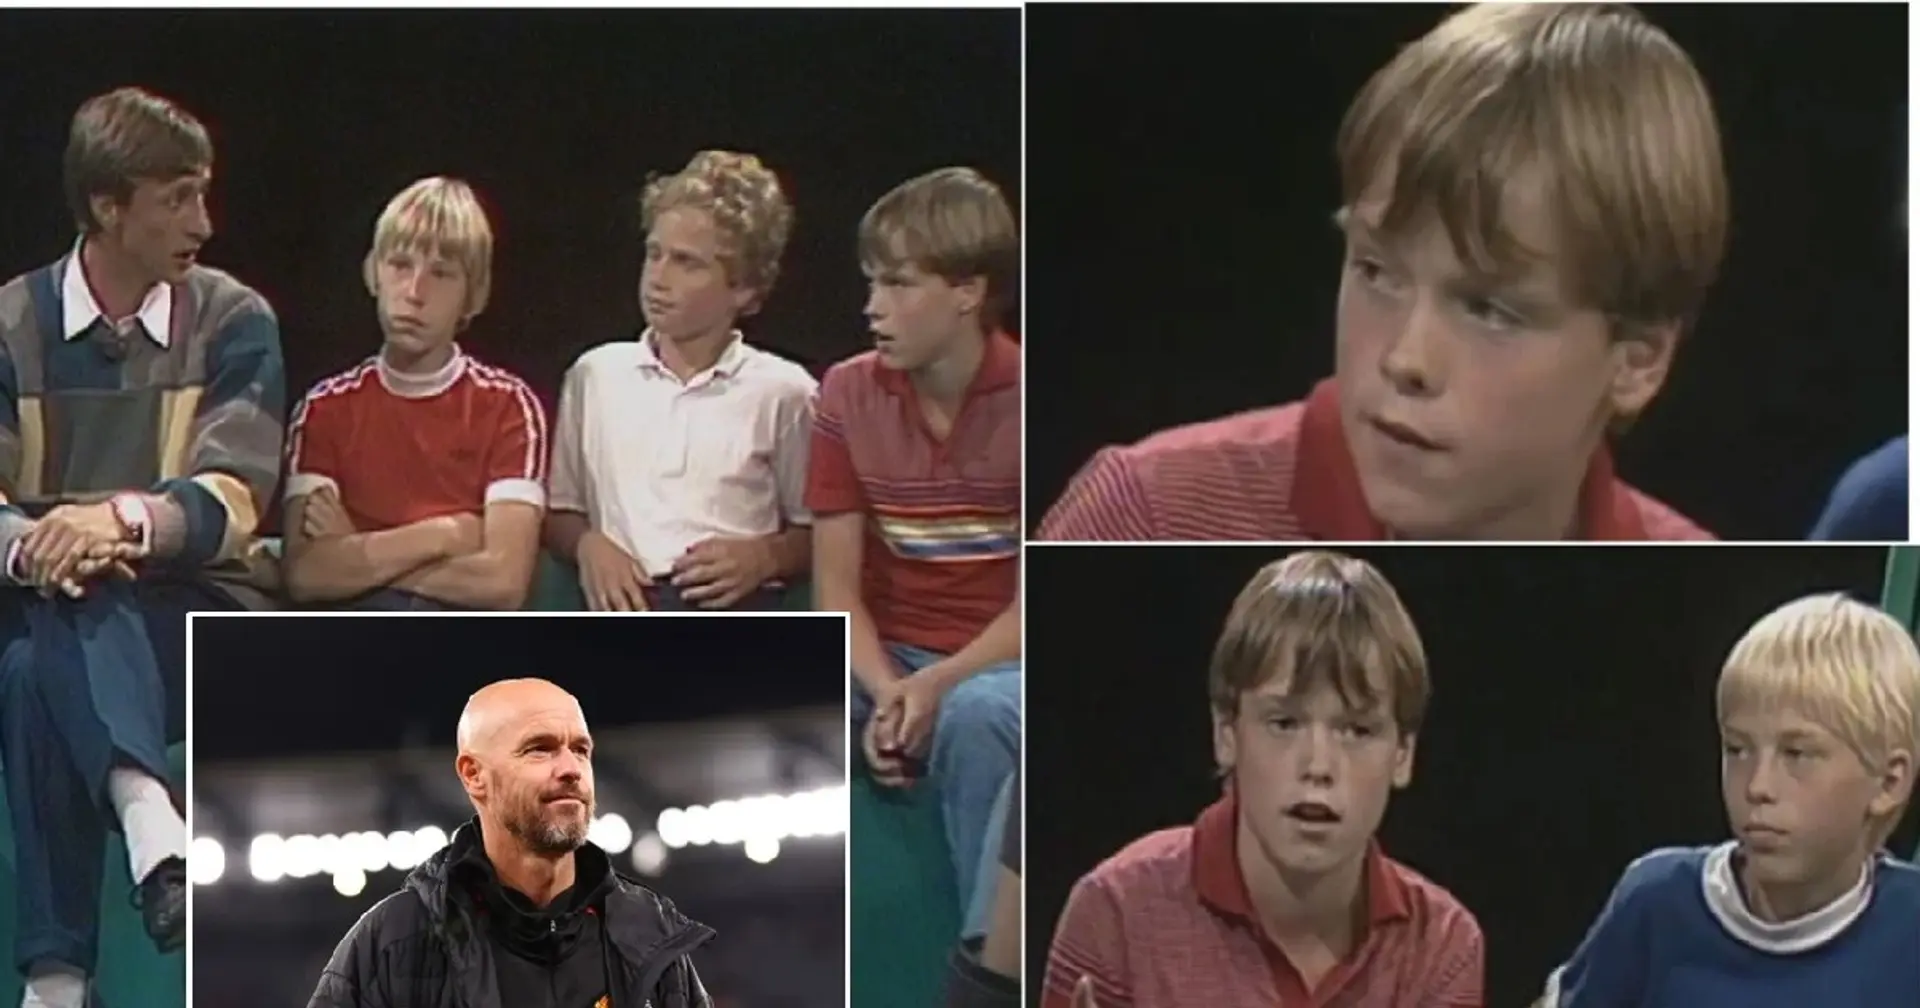 'You take the moment': Ten Hag recalls famous TV chat with Cruyff at 13